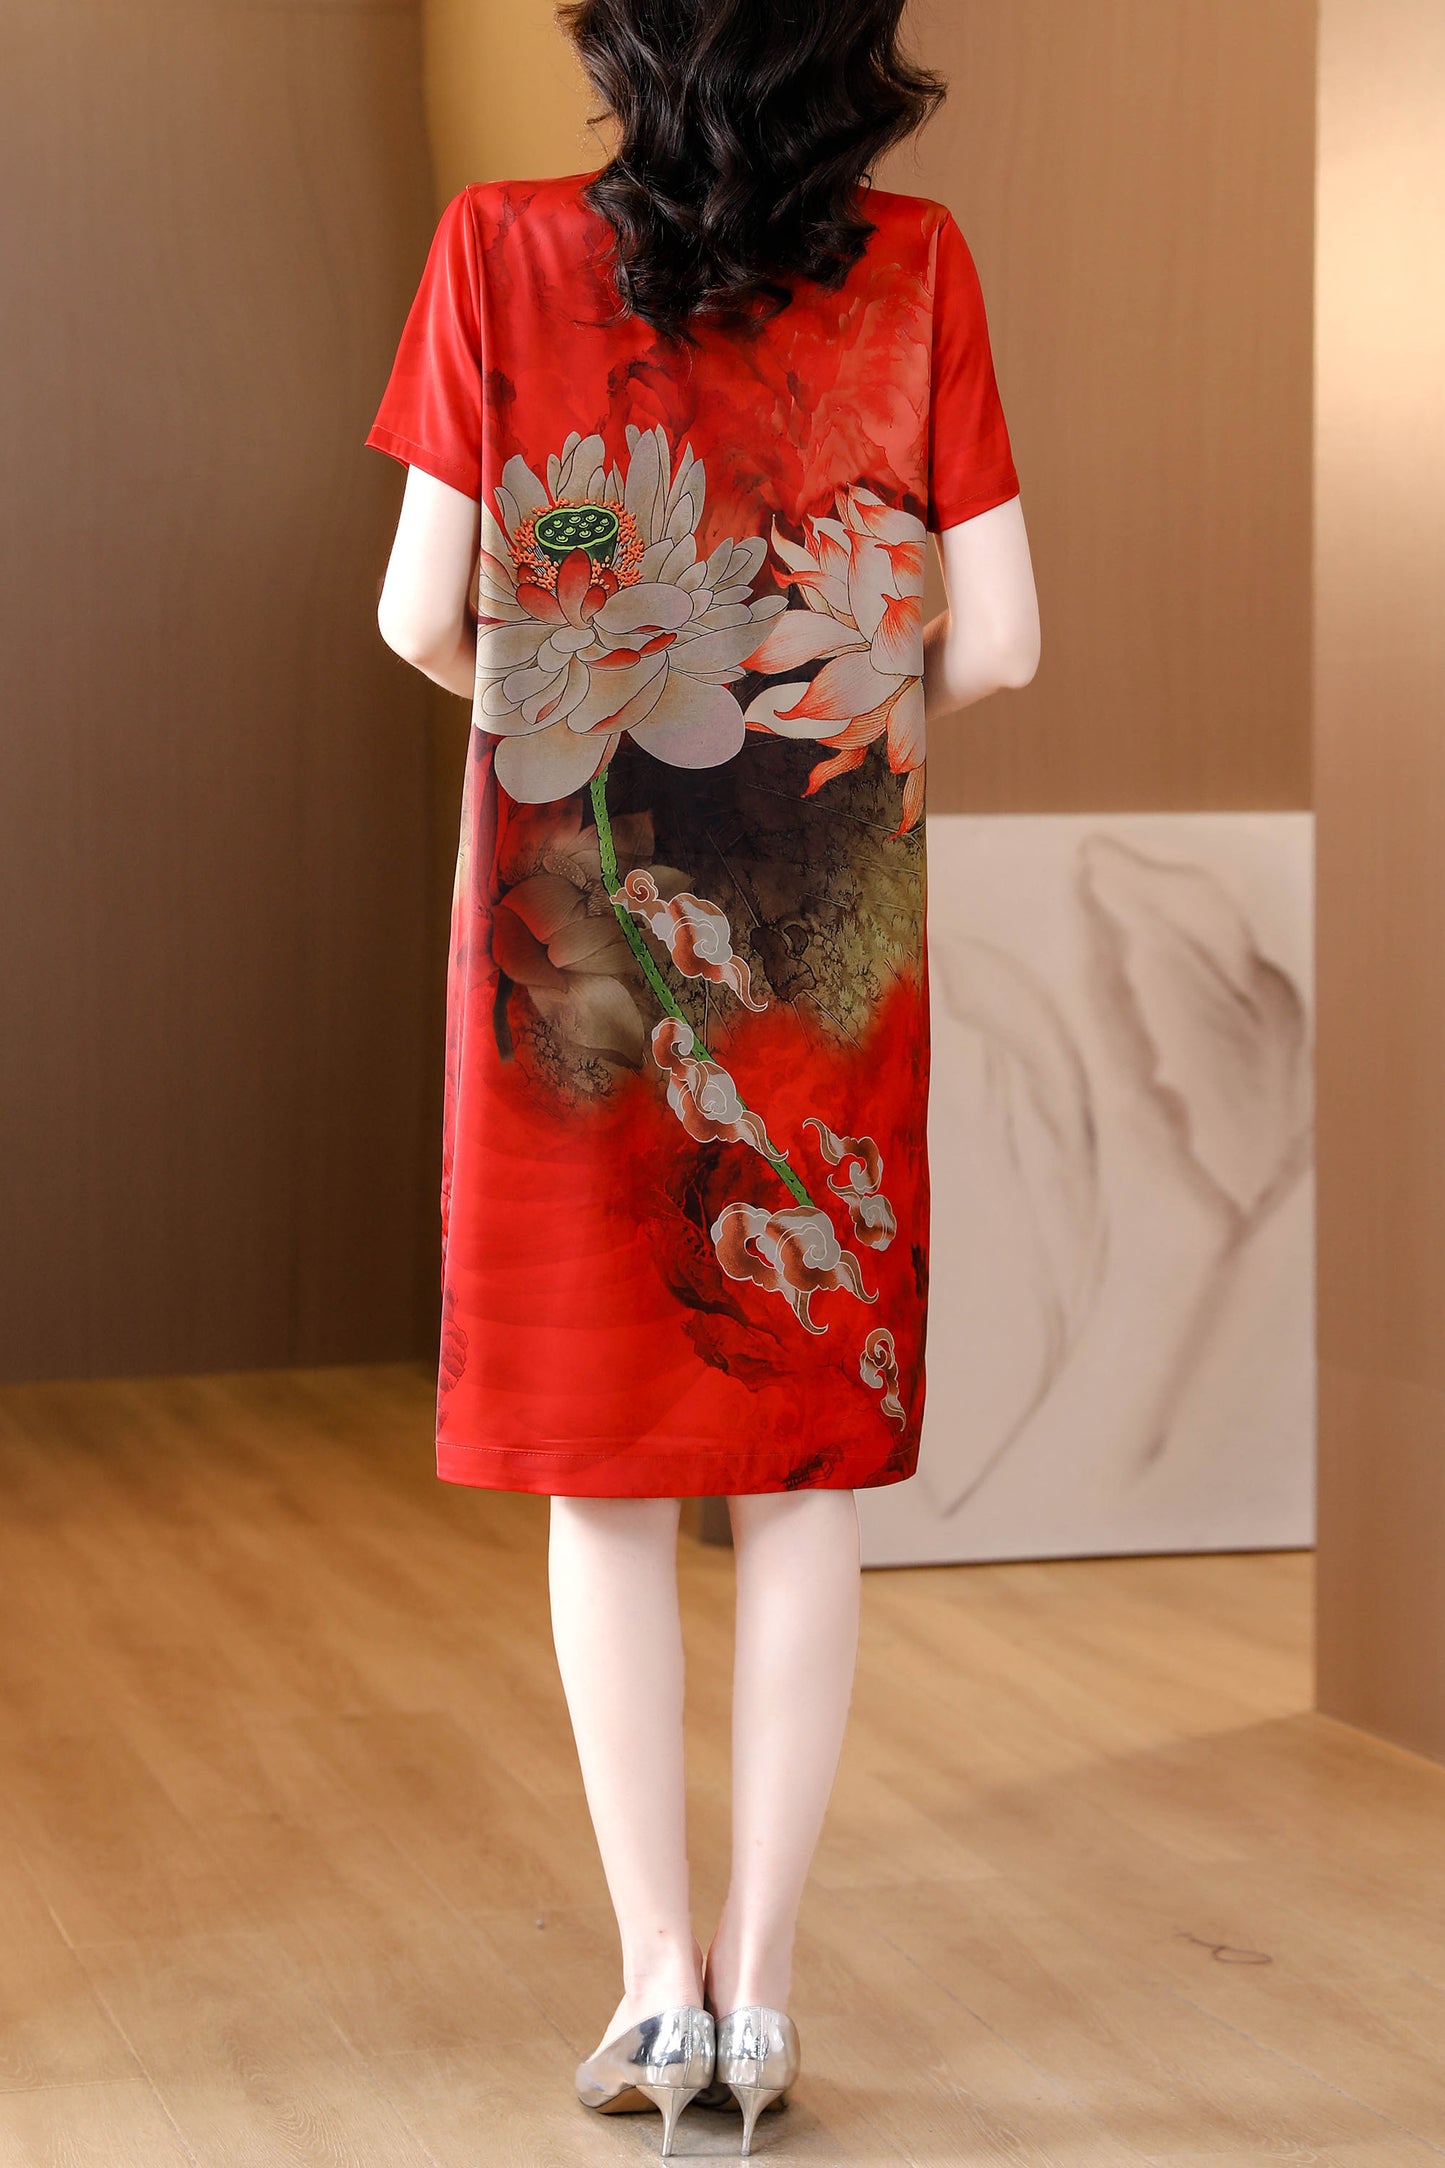 Red Vintage Floral Print Cheongsam Casual Loose Dress